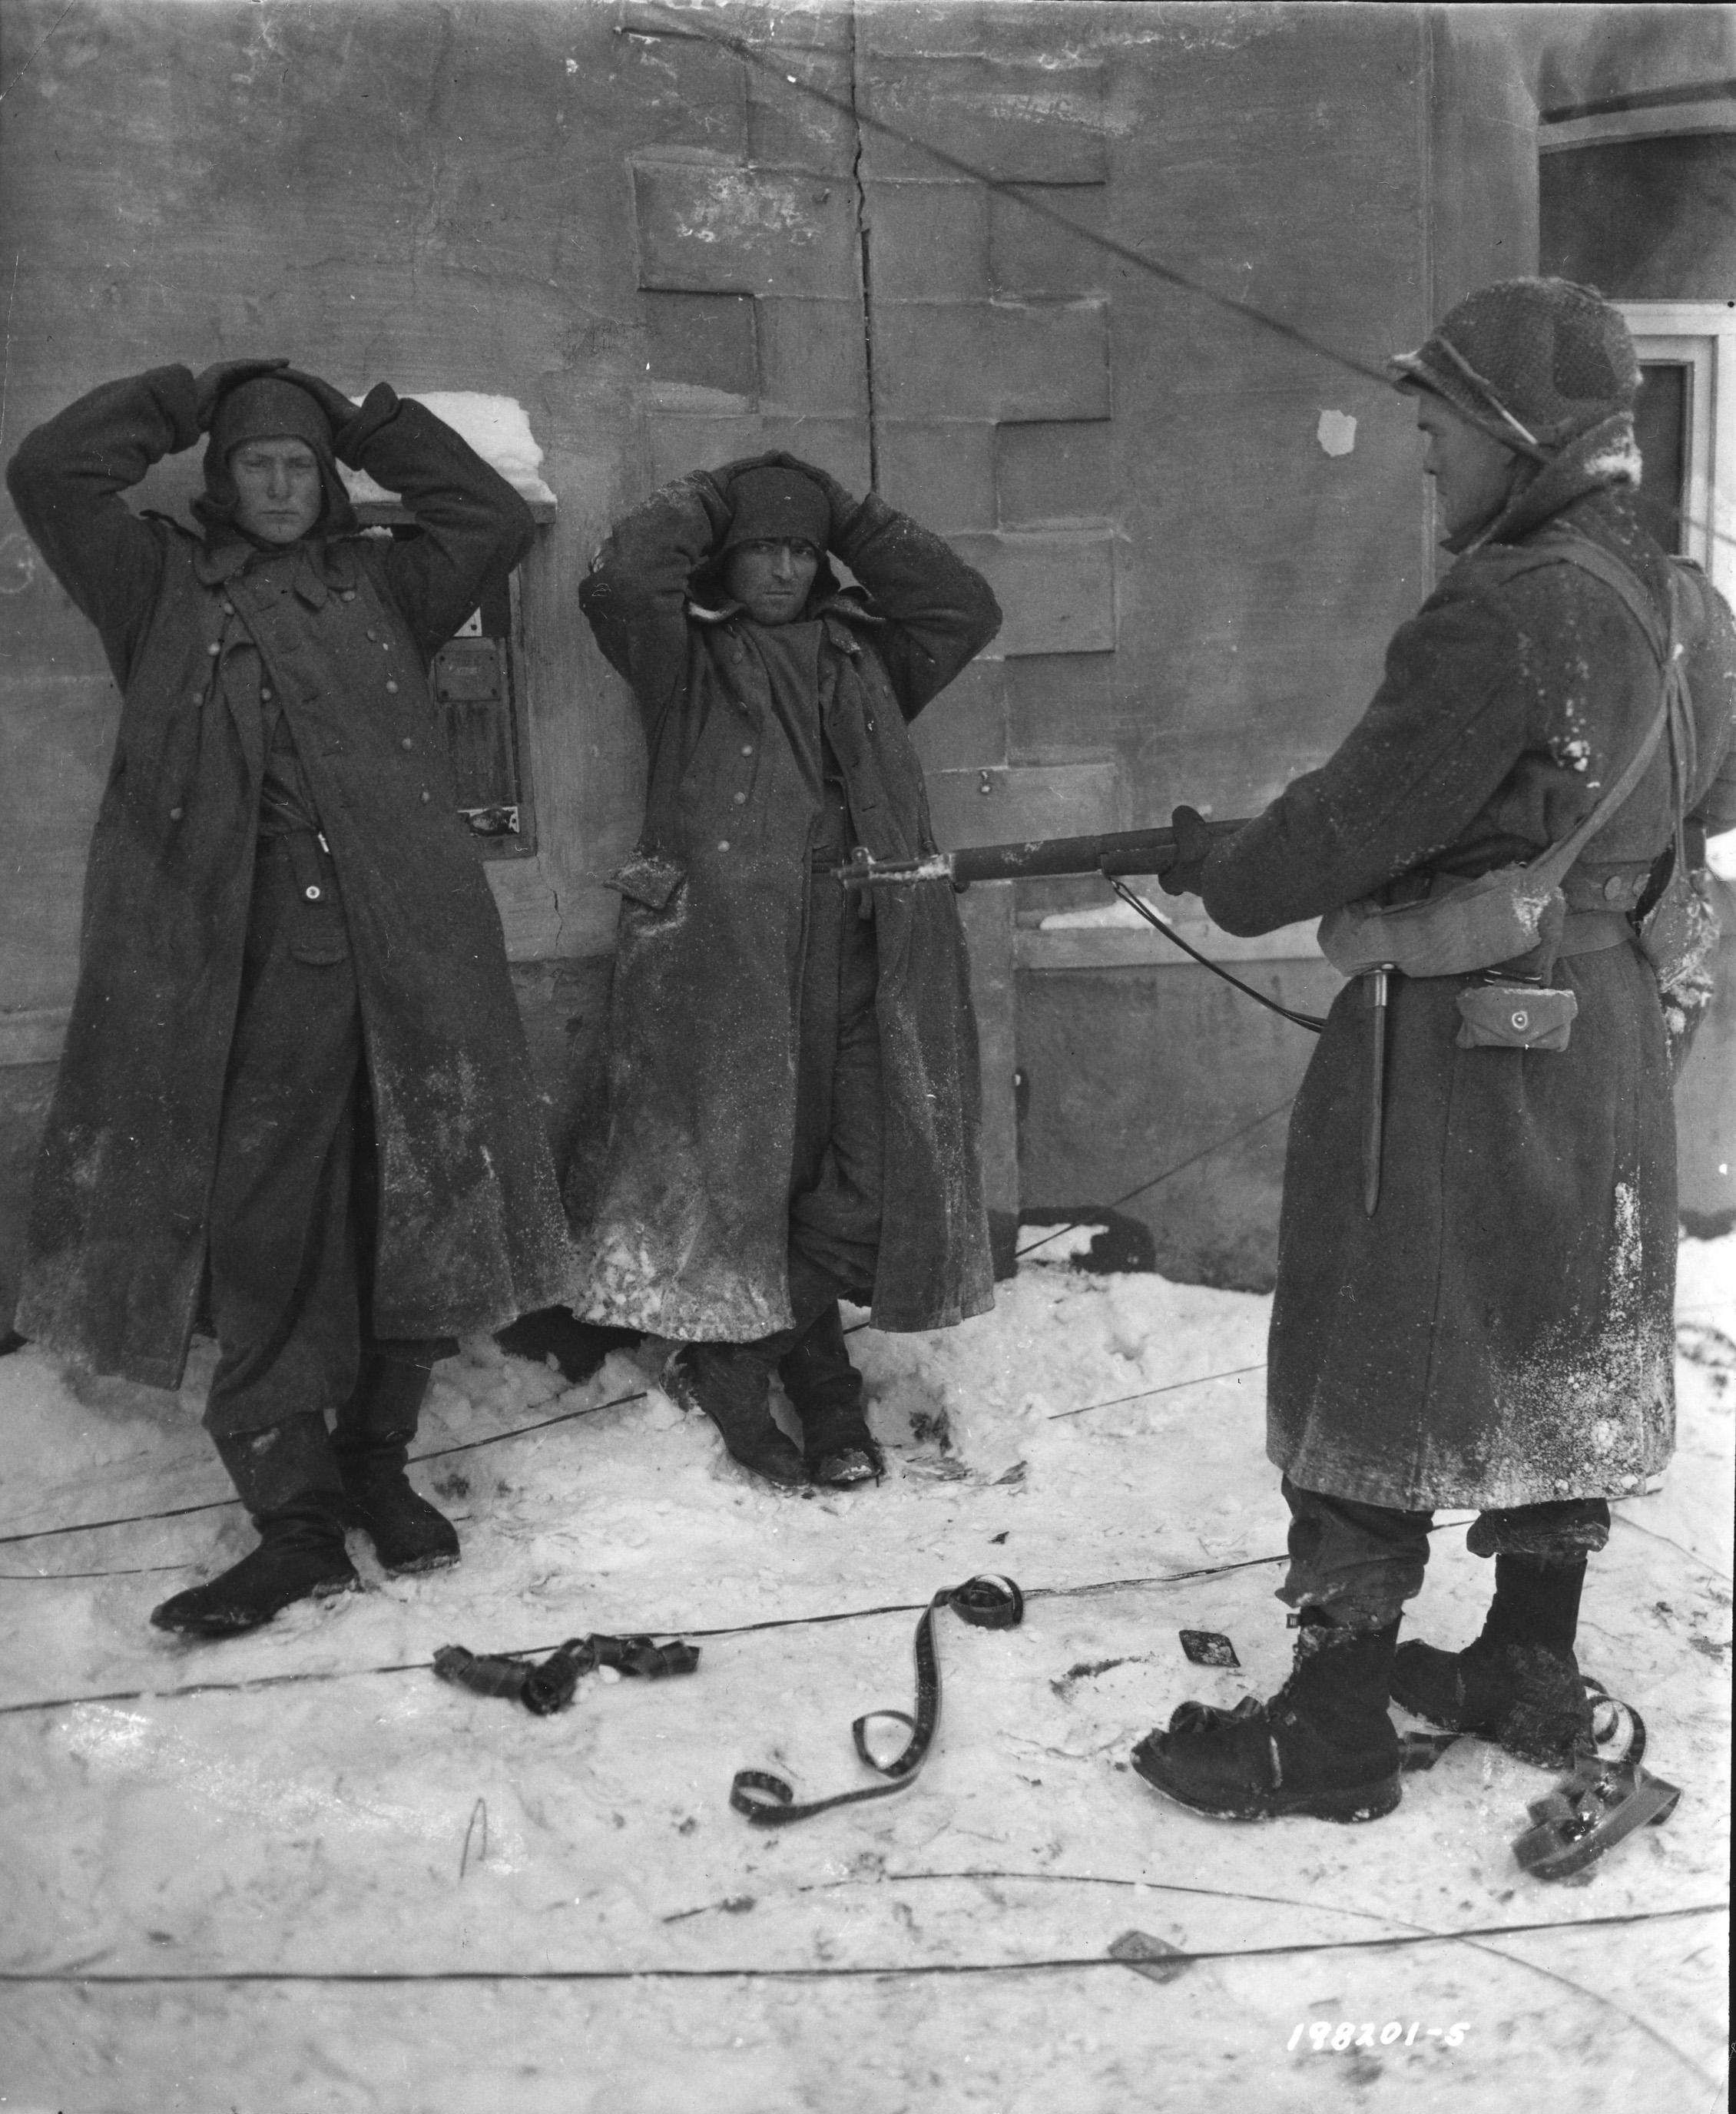 Two German SS soldiers are standing against a wall, while a US soldier guards them.